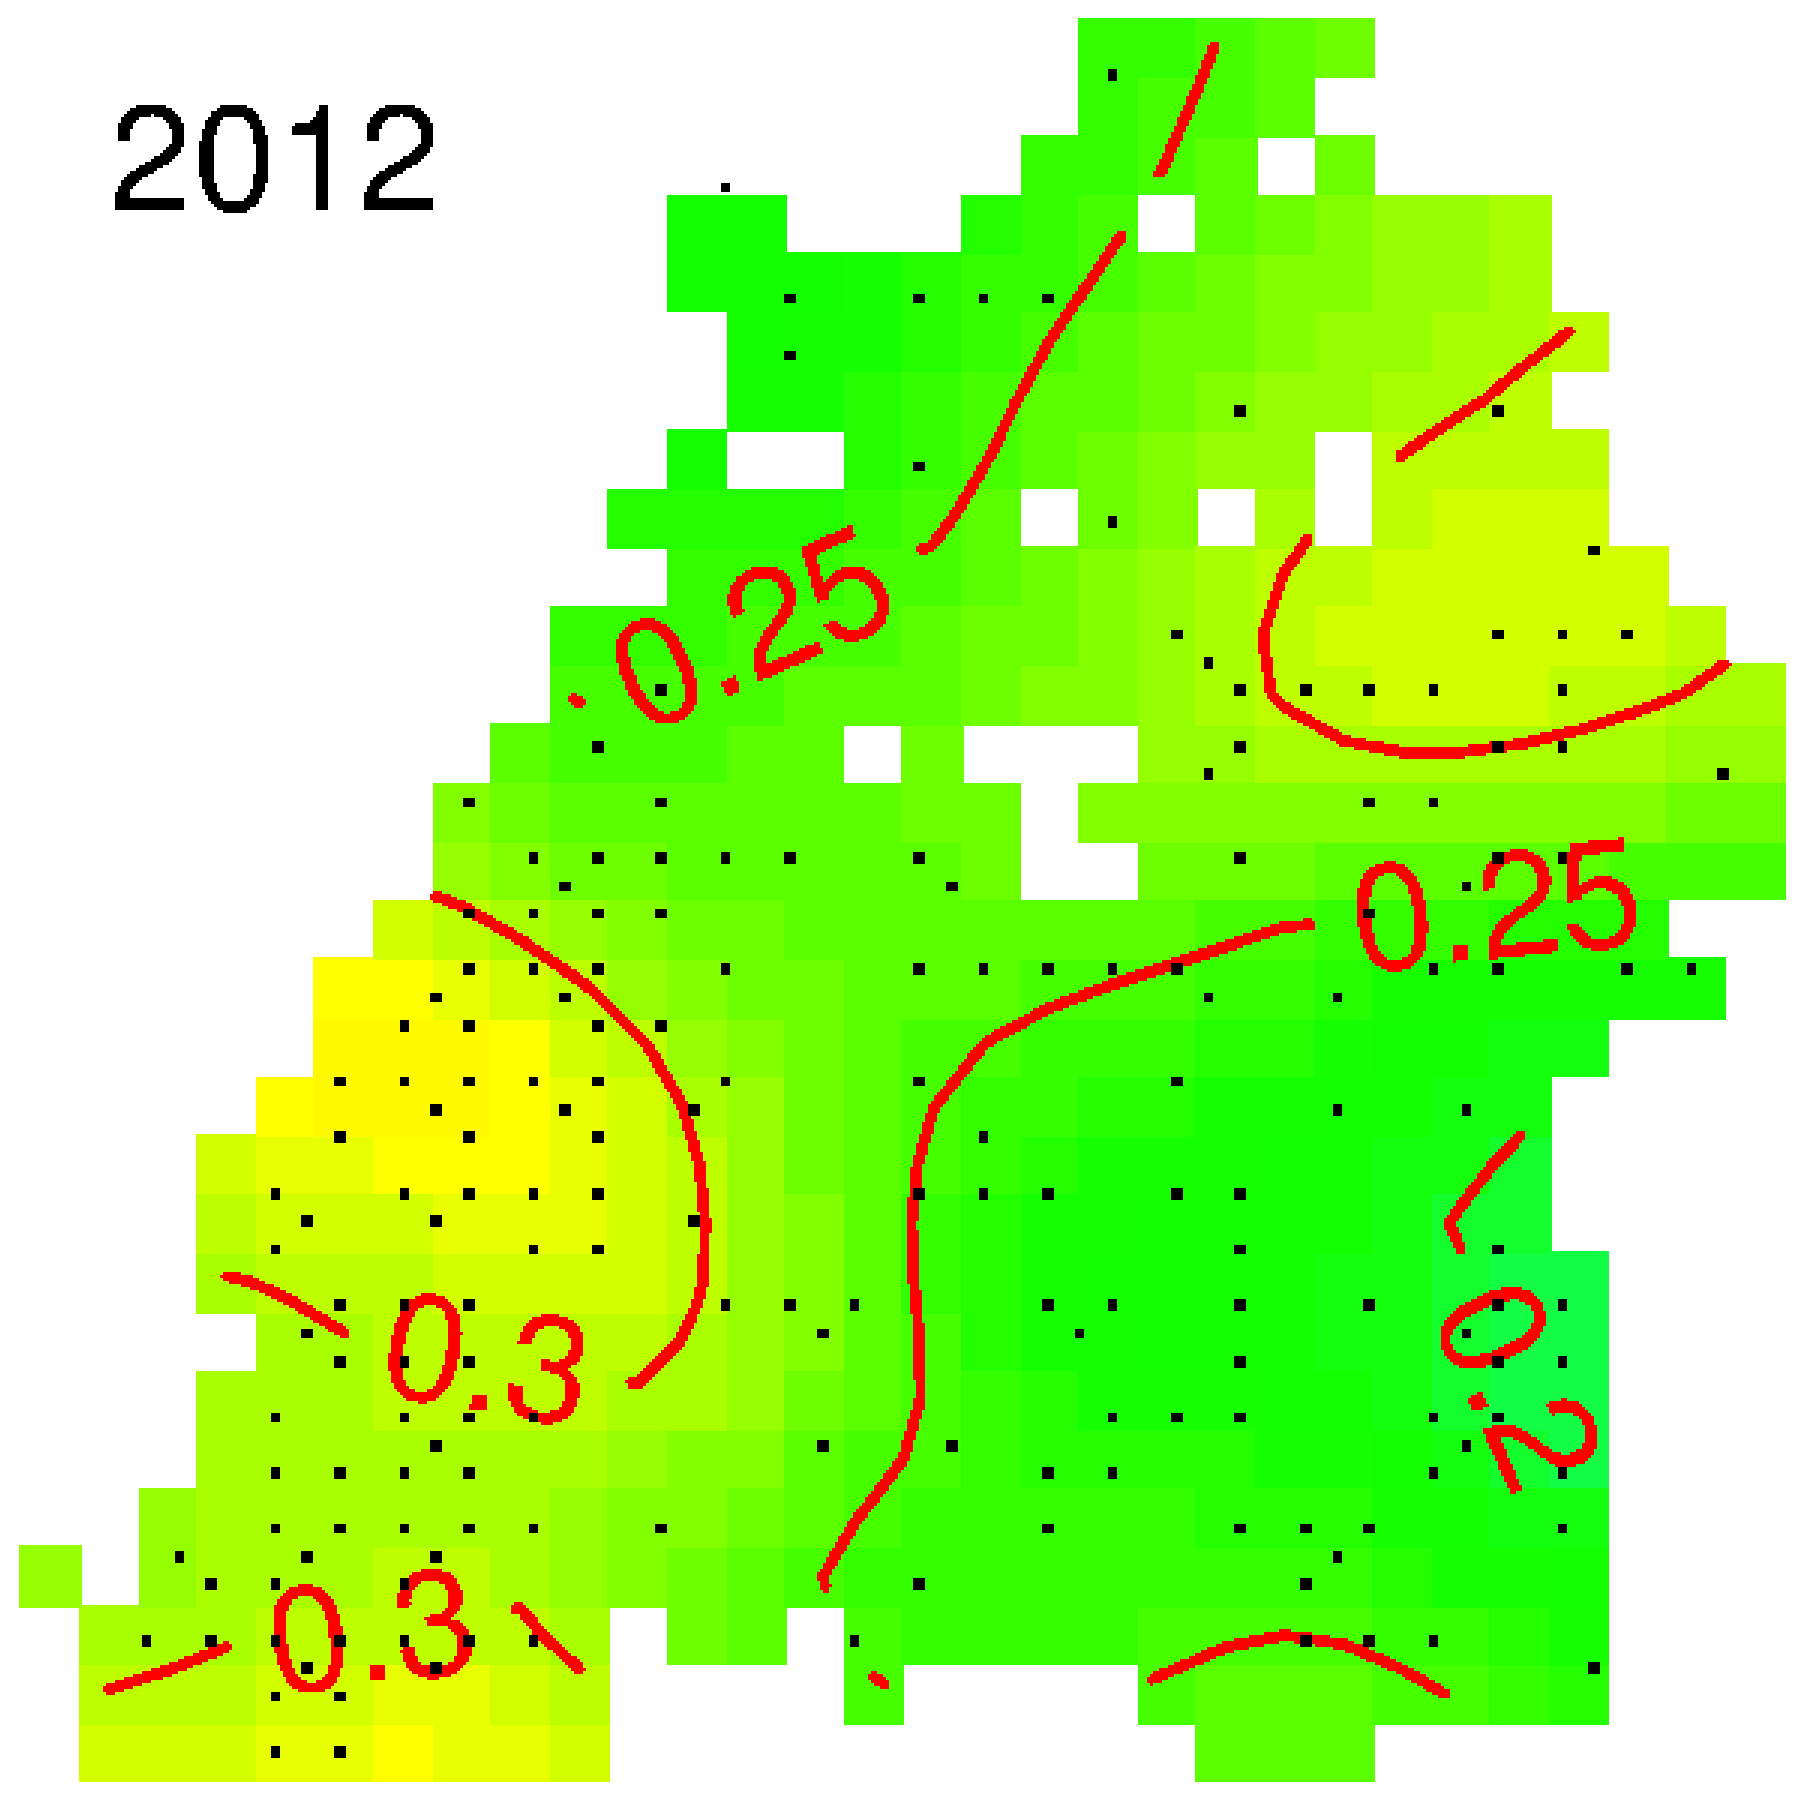 Figure Temporal (left) and spatial (right) estimates of
      spruce tree health, indicated by defoliation in
      the crown. Left: temporal trend estimates from the traditional
        method are the red triangles with
      95% confidence intervals; temporal trend estimates from the new method
      with age as observed and
      standardised for age are the black circles and the blue crosses
      respectively, both with Bayesian
      95% confidence bands. Right: spatial maps for spruce of median
      age, unobtainable with the
      traditional method. The black dots indicate the sampling locations, the
      red isolines indicate the level
      of defoliation in the crown (yellow is high defoliation of at least 30%,
      green is medium defoliation at
      25%).